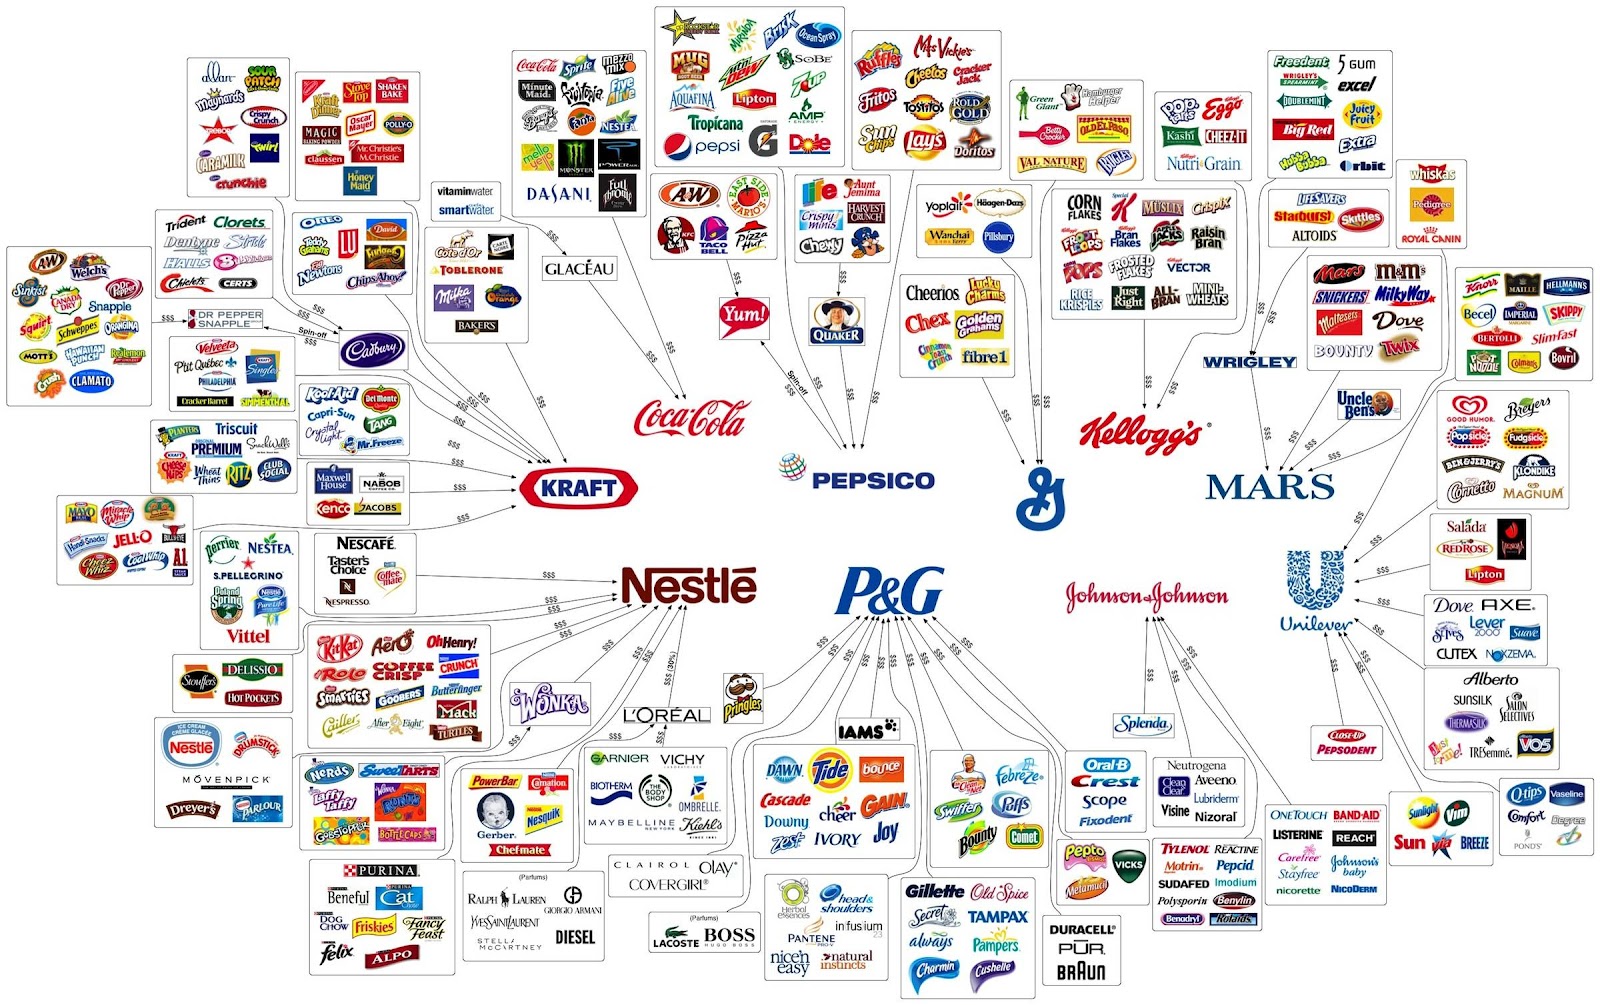 Cyberpac Blog: Big Brands of the World